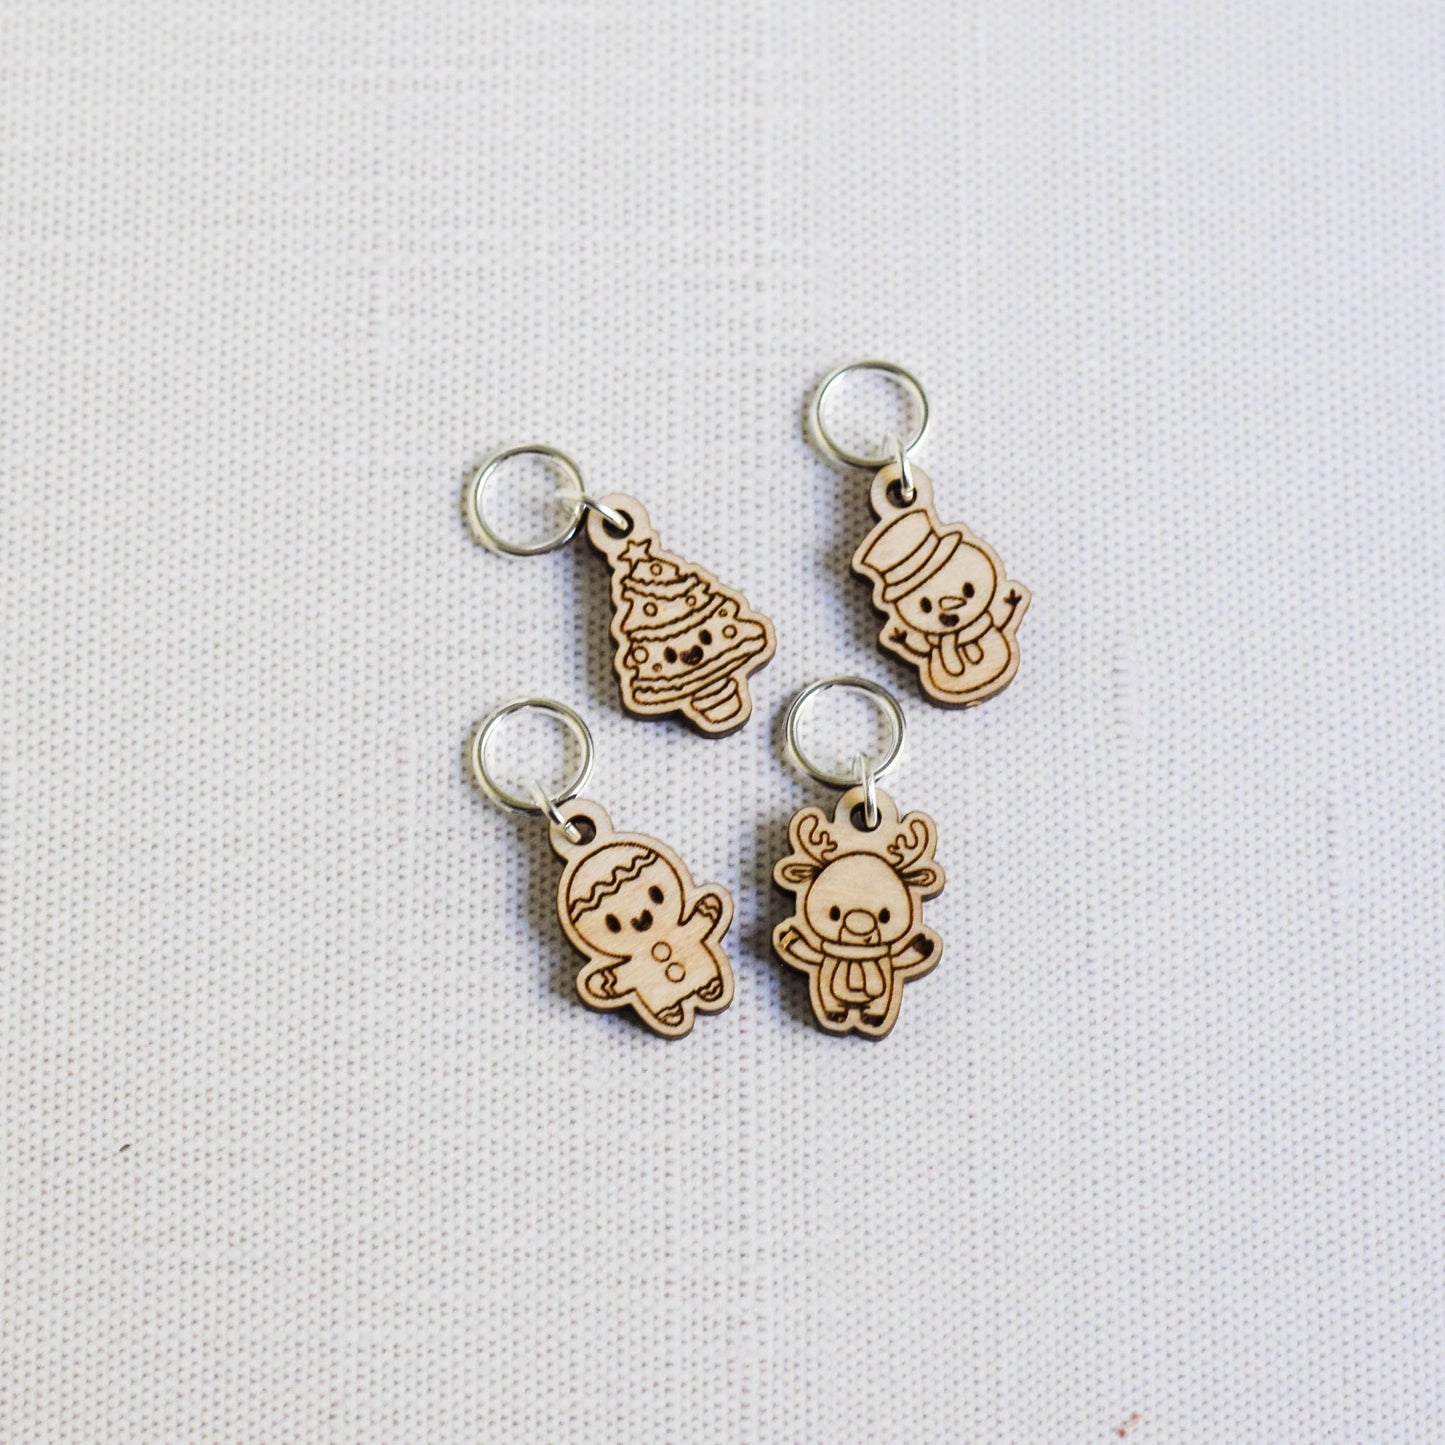 Set of 4 Laser Engraved Stitch Markers - Kawaii Christmas